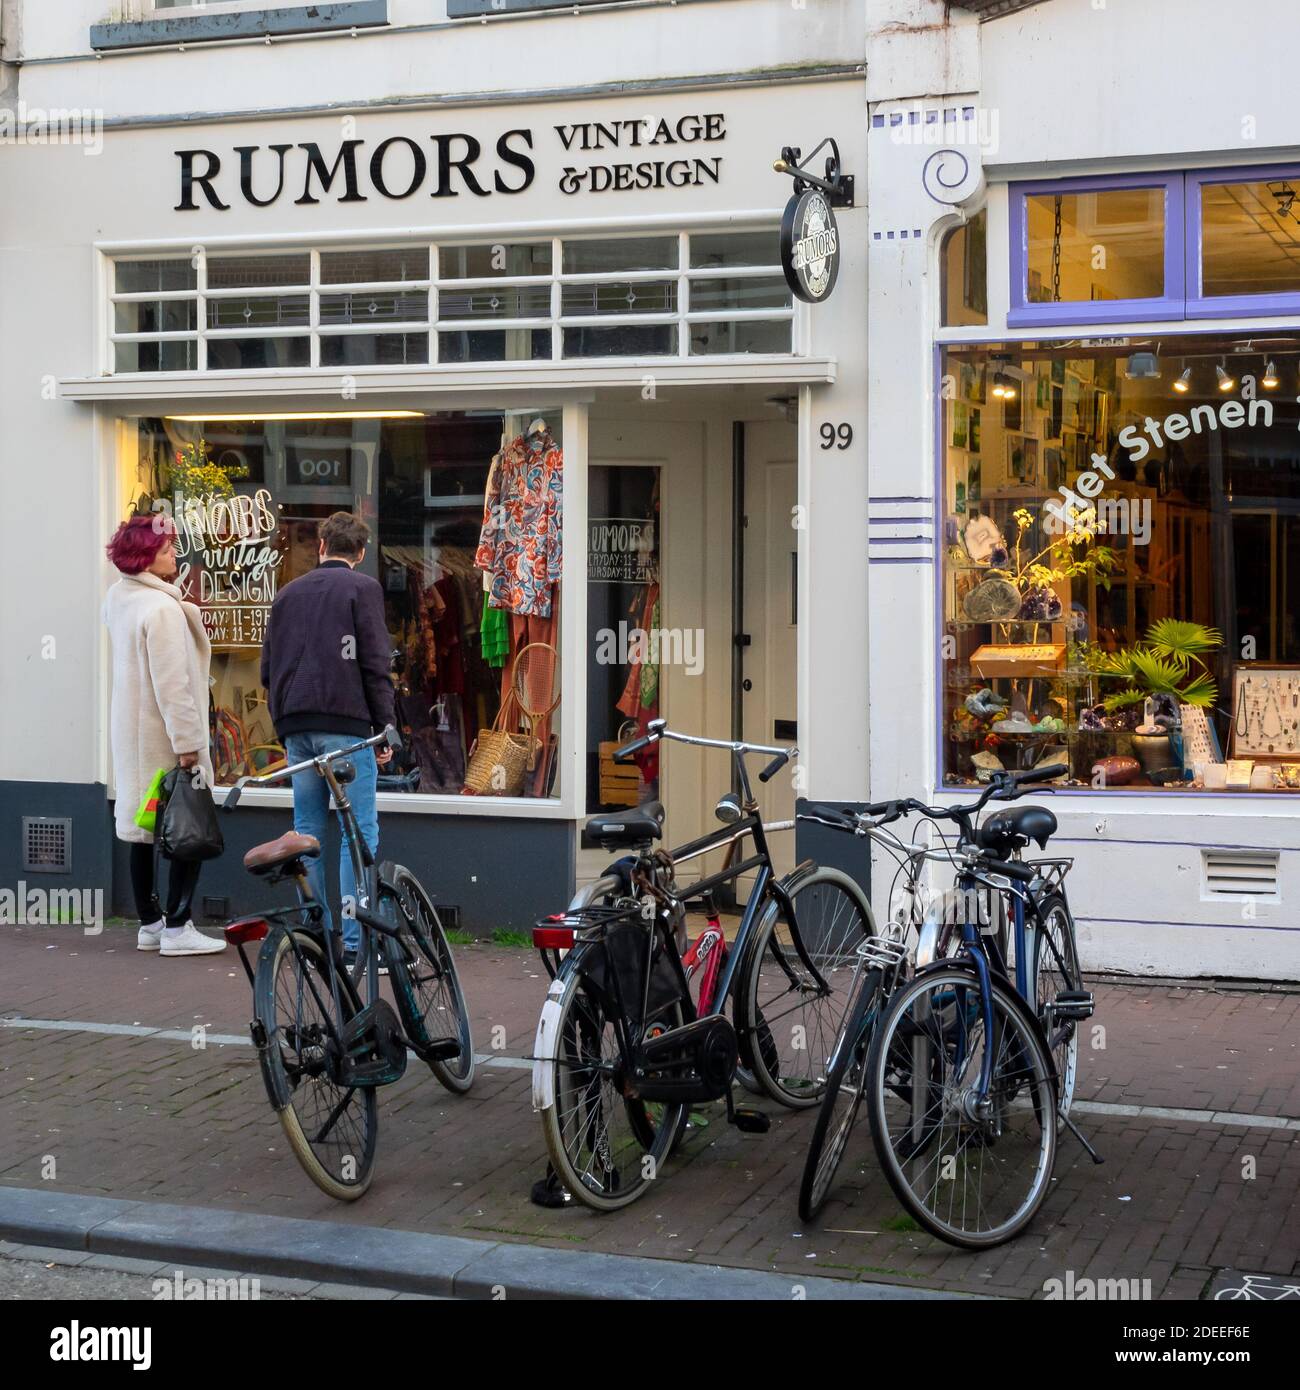 Vintage Clothing Shop High Resolution Stock Photography and Images - Alamy